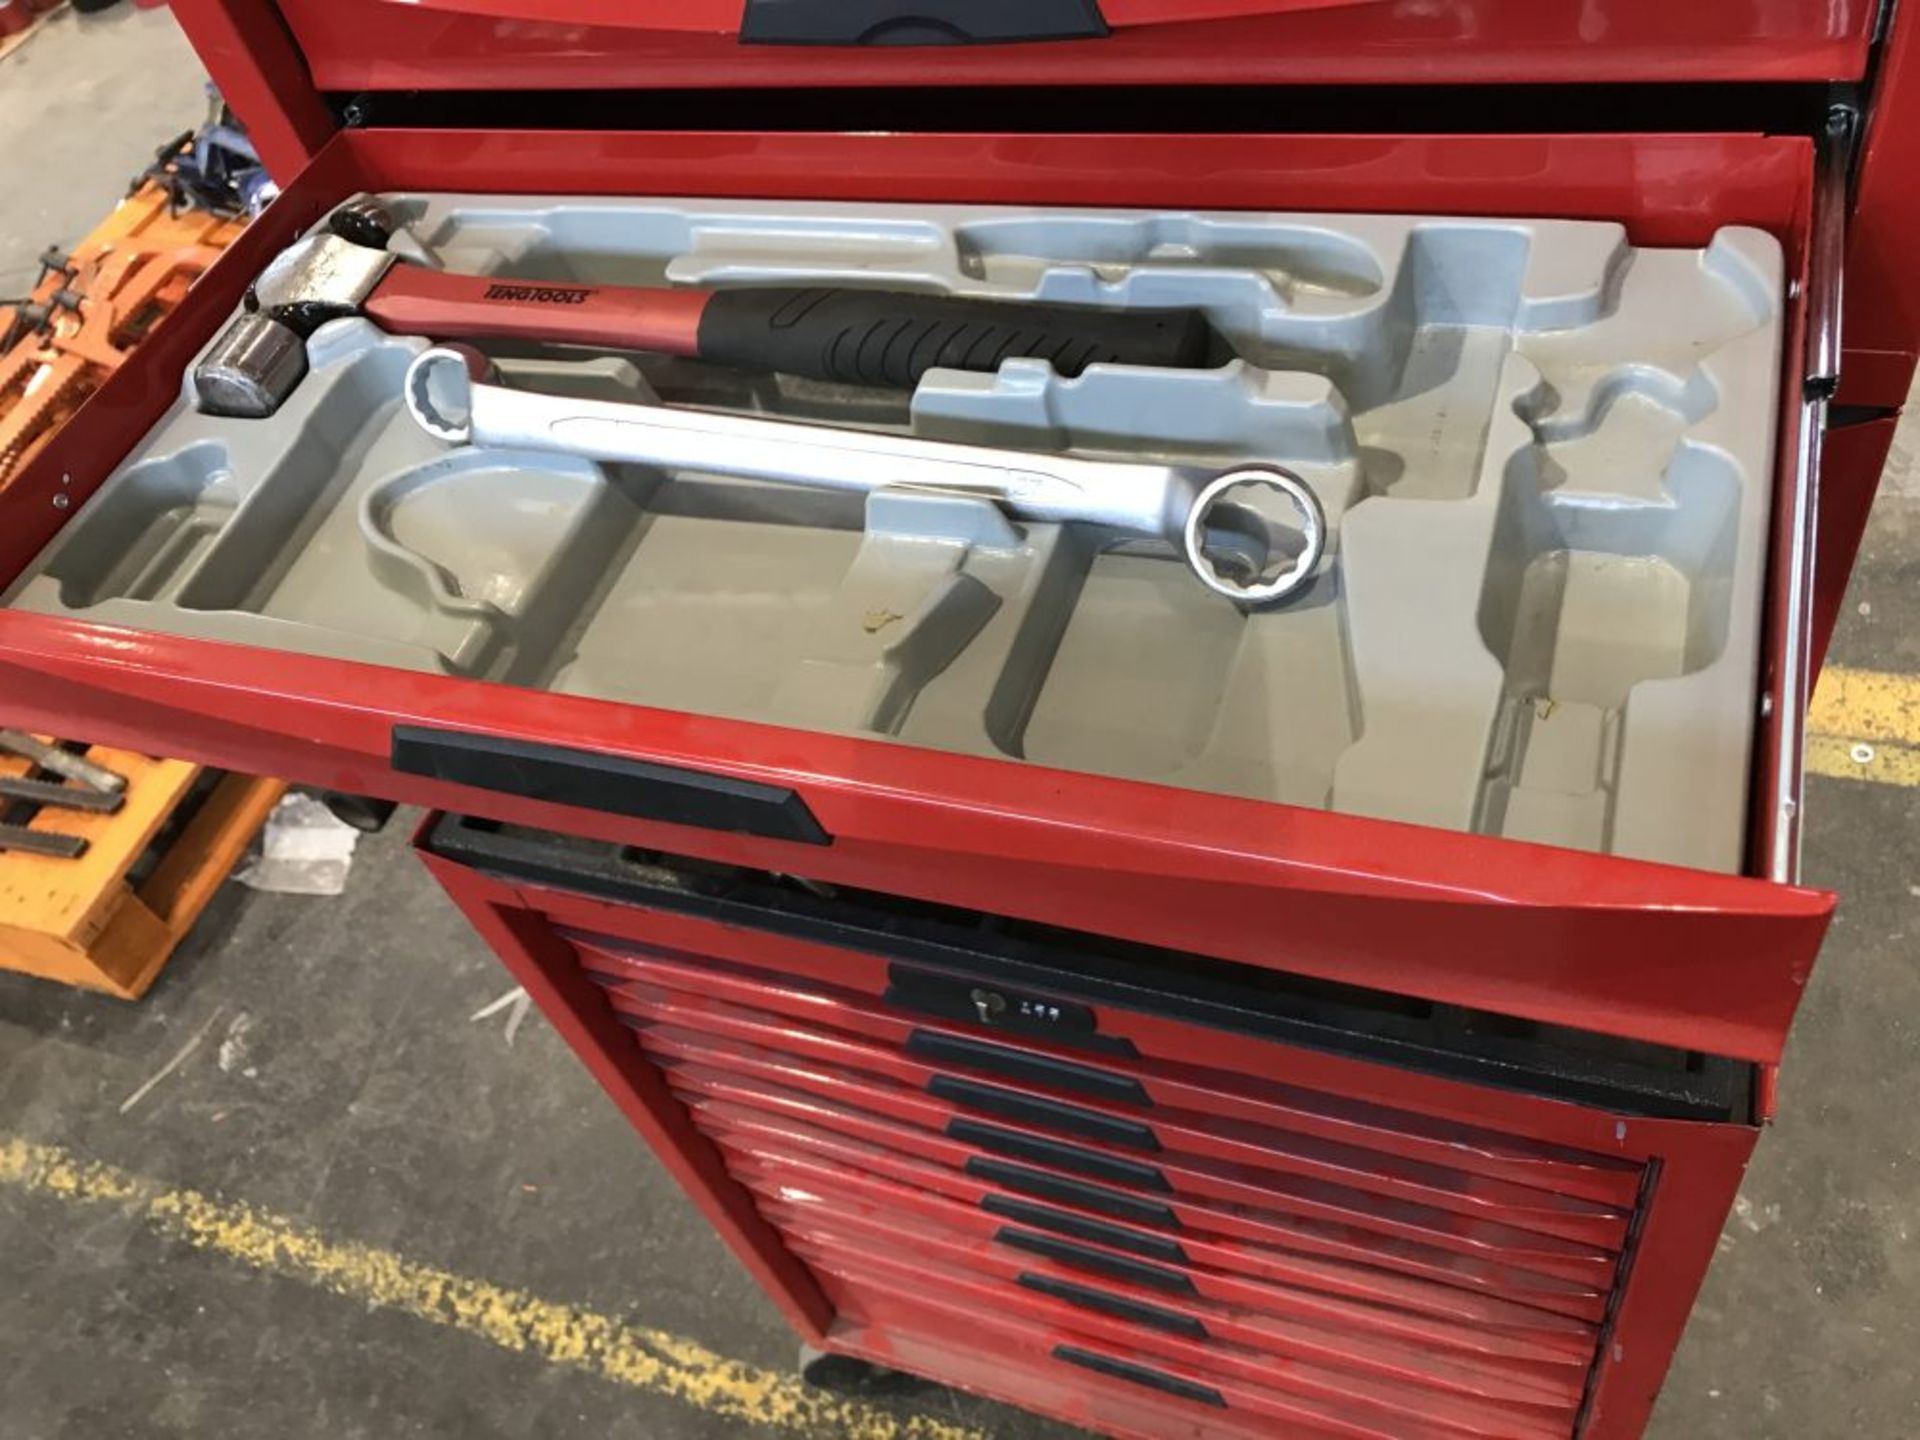 A Teng Tools mobile tool cabinet with additional casters, some tools missing - Image 15 of 17